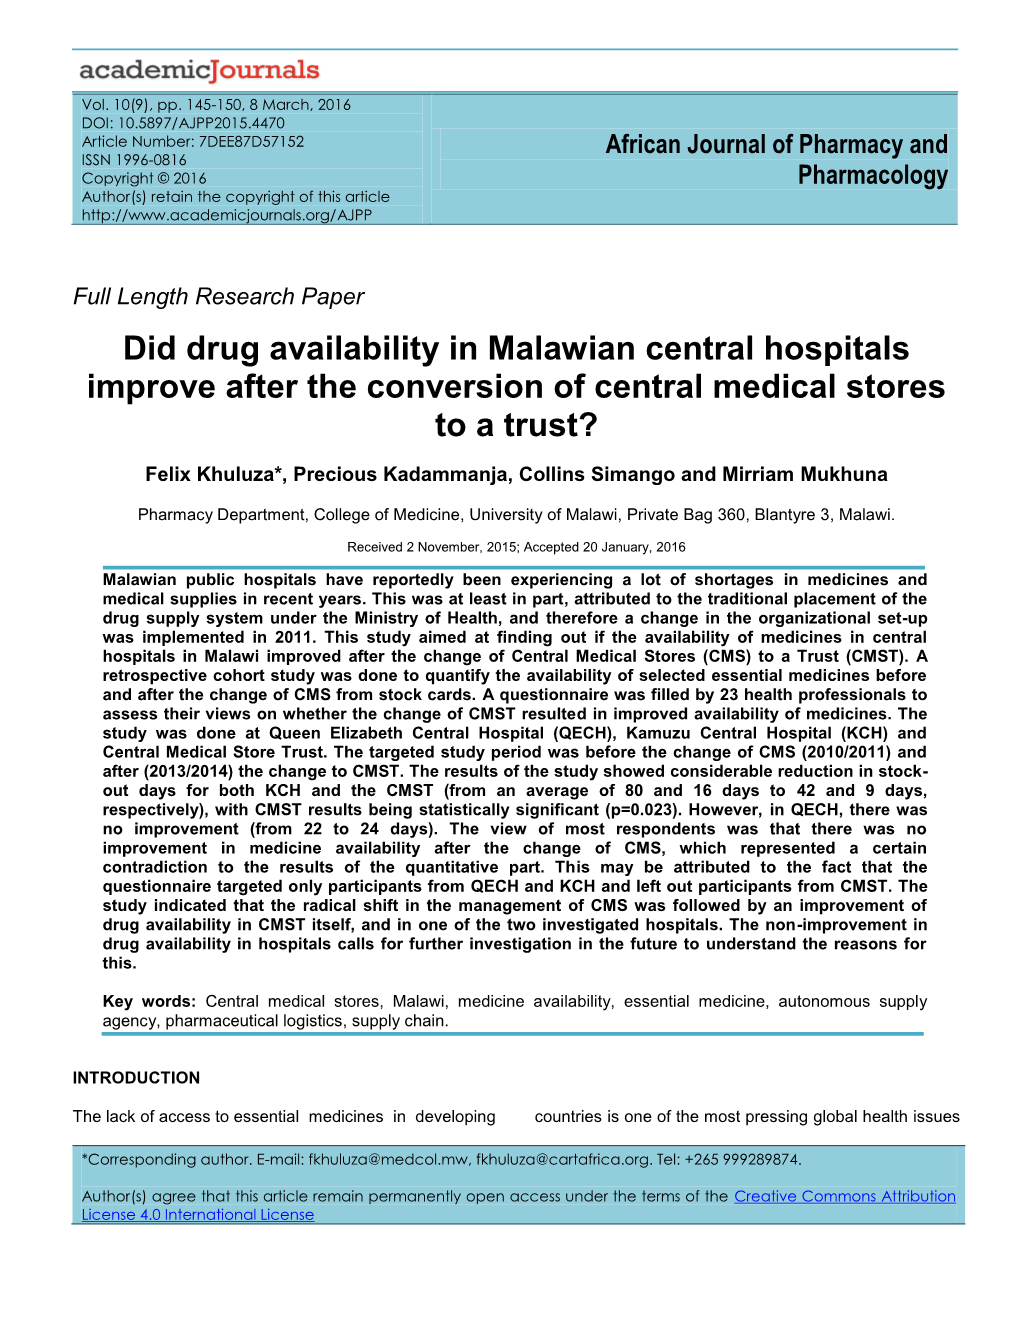 Did Drug Availability in Malawian Central Hospitals Improve After the Conversion of Central Medical Stores to a Trust?